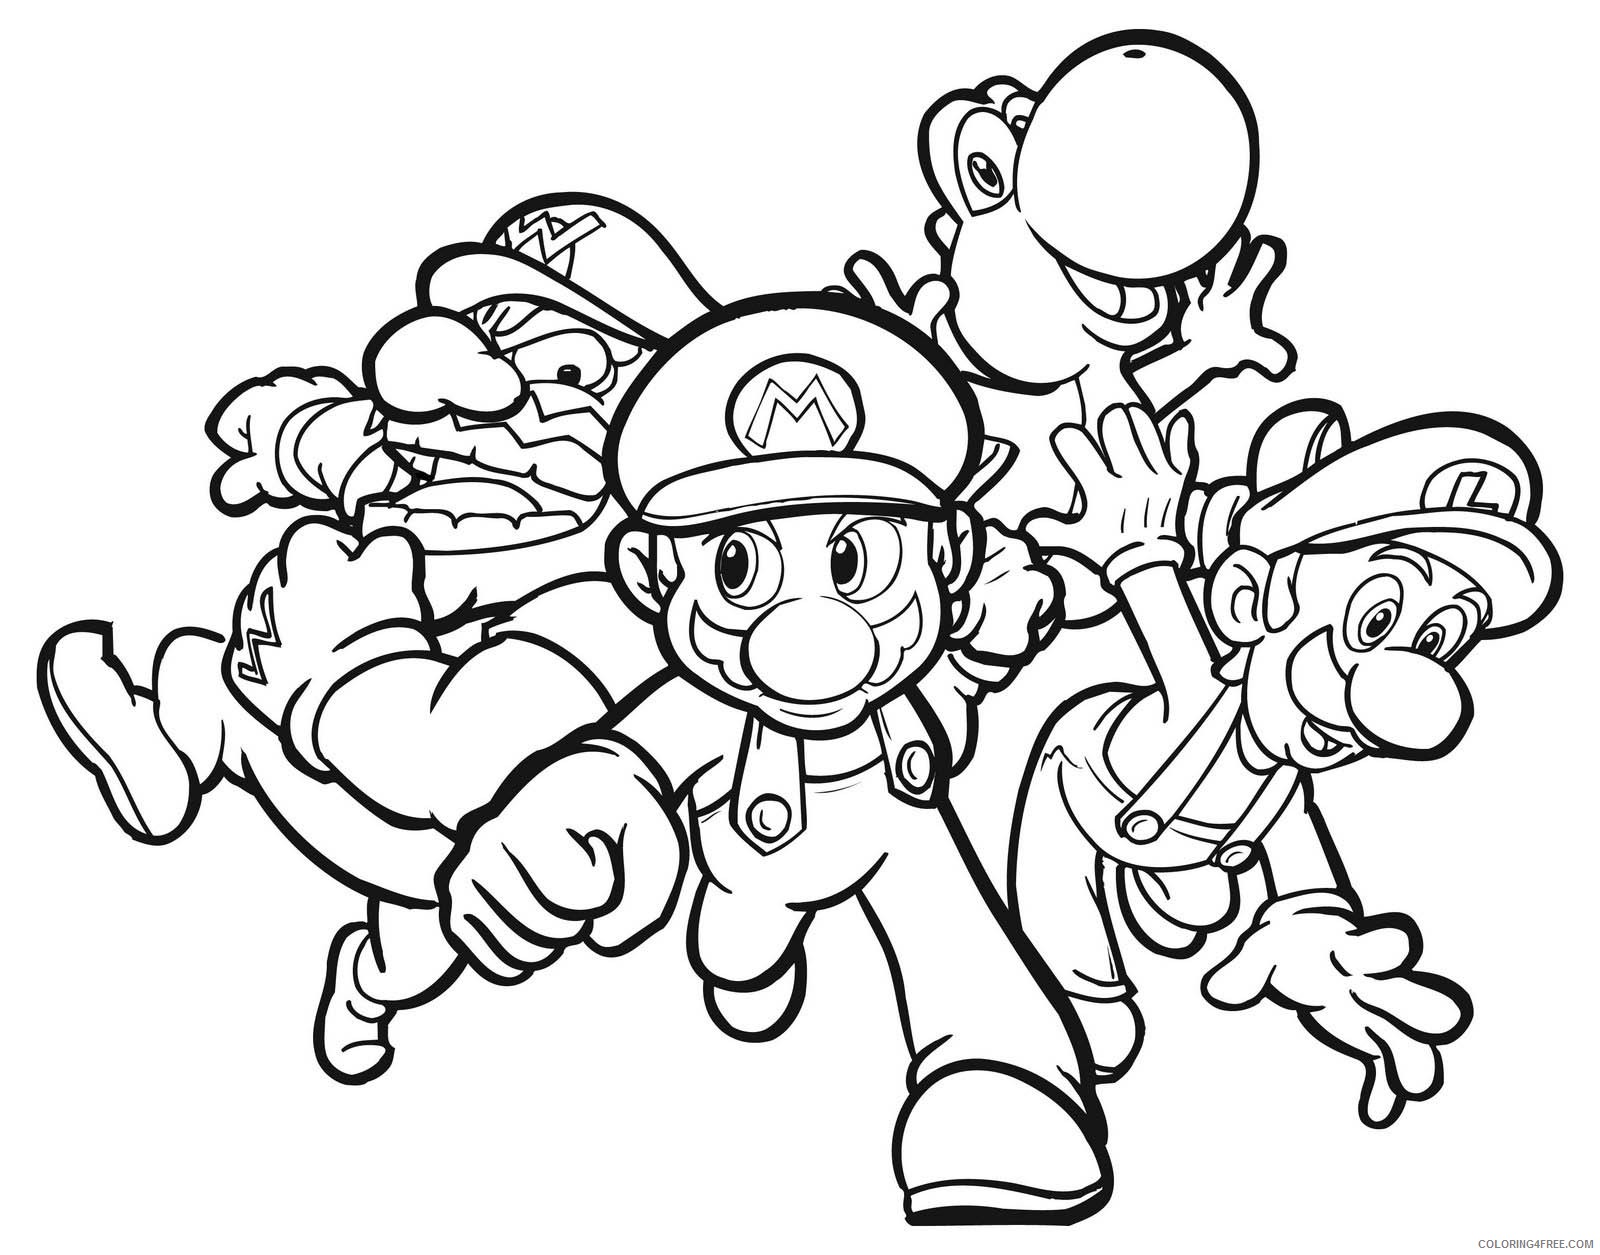 mario and friends coloring pages Coloring4free